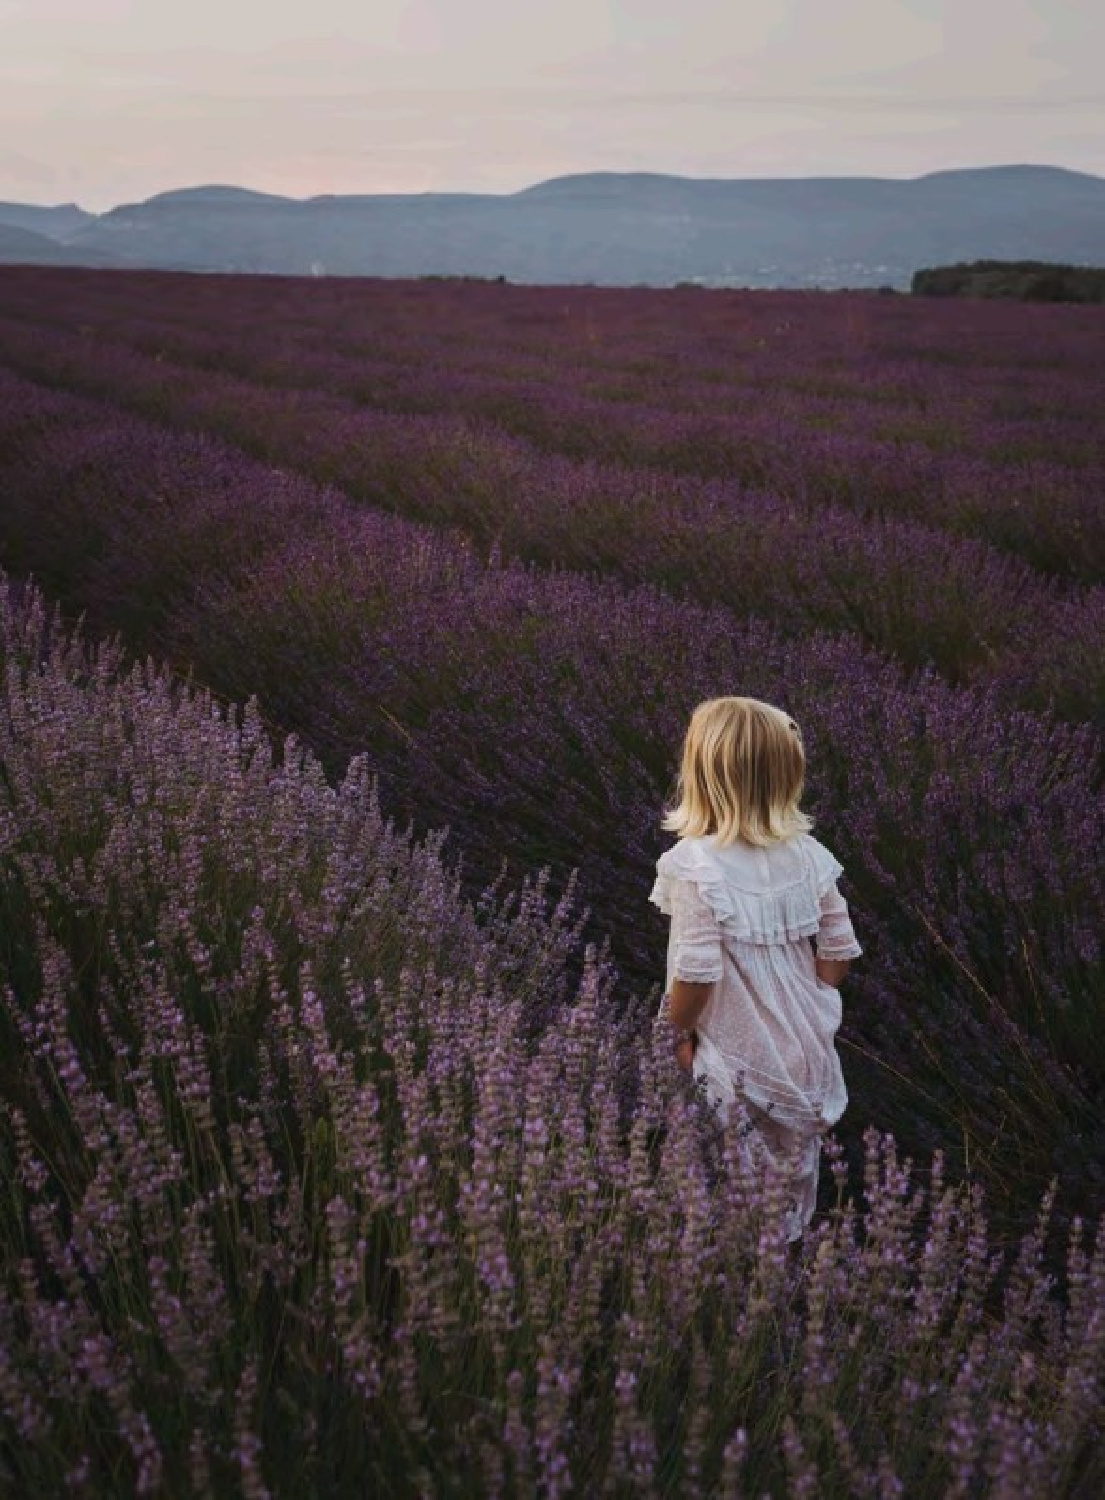 Eloise in a field of Provence lavender from a lovely page in THE FLOWERS OF PROVENCE by Jamie Beck. #provencestyle #flowersofprovence #jamiebeck